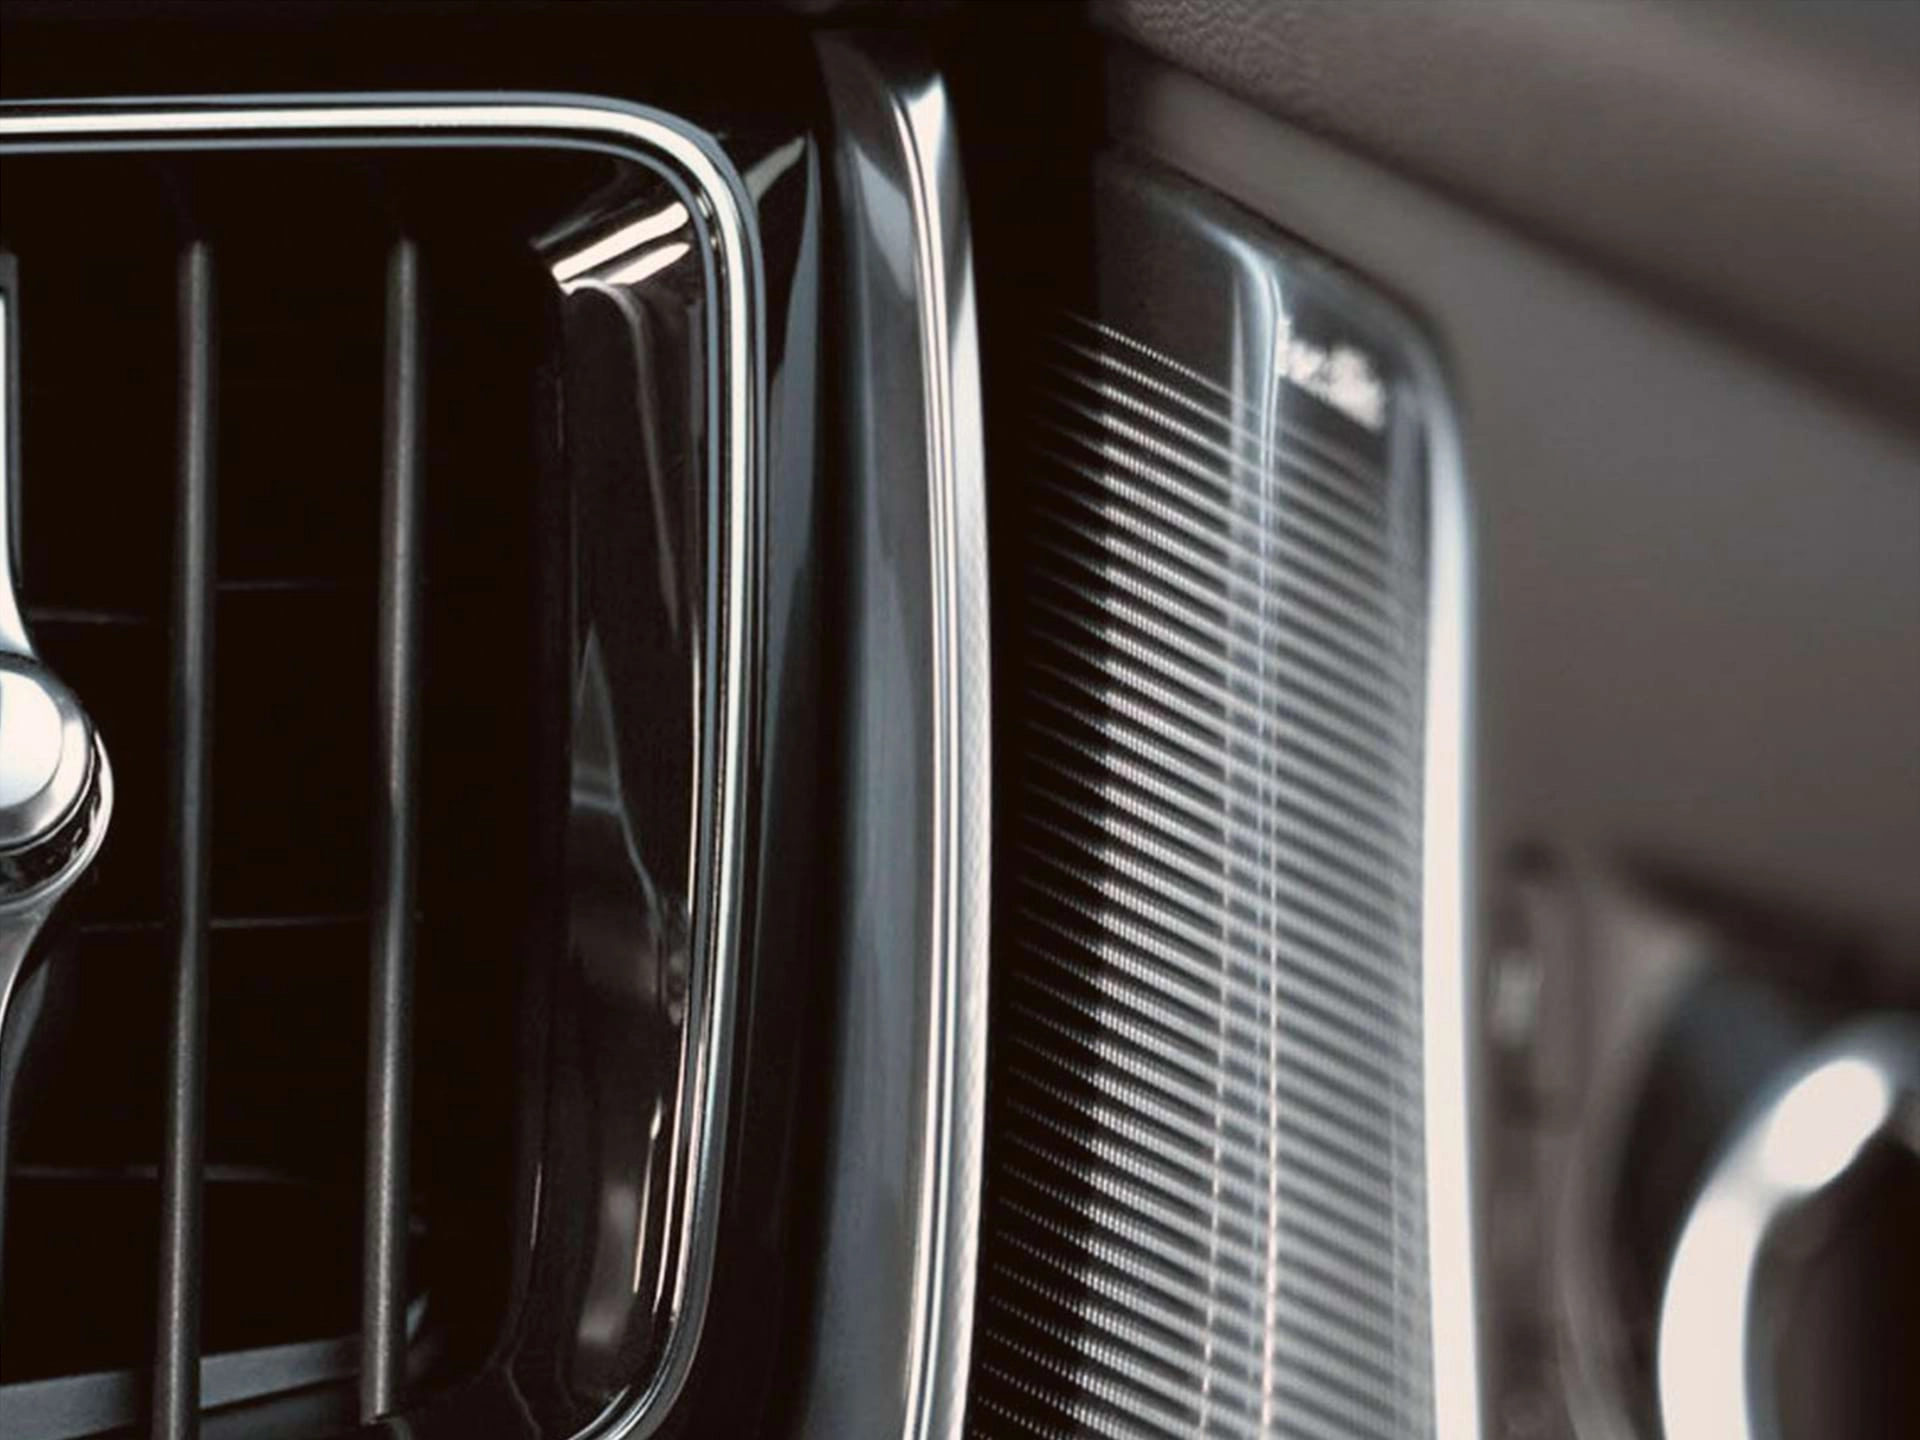 Close-up view of the air vents in a Volvo sedan.